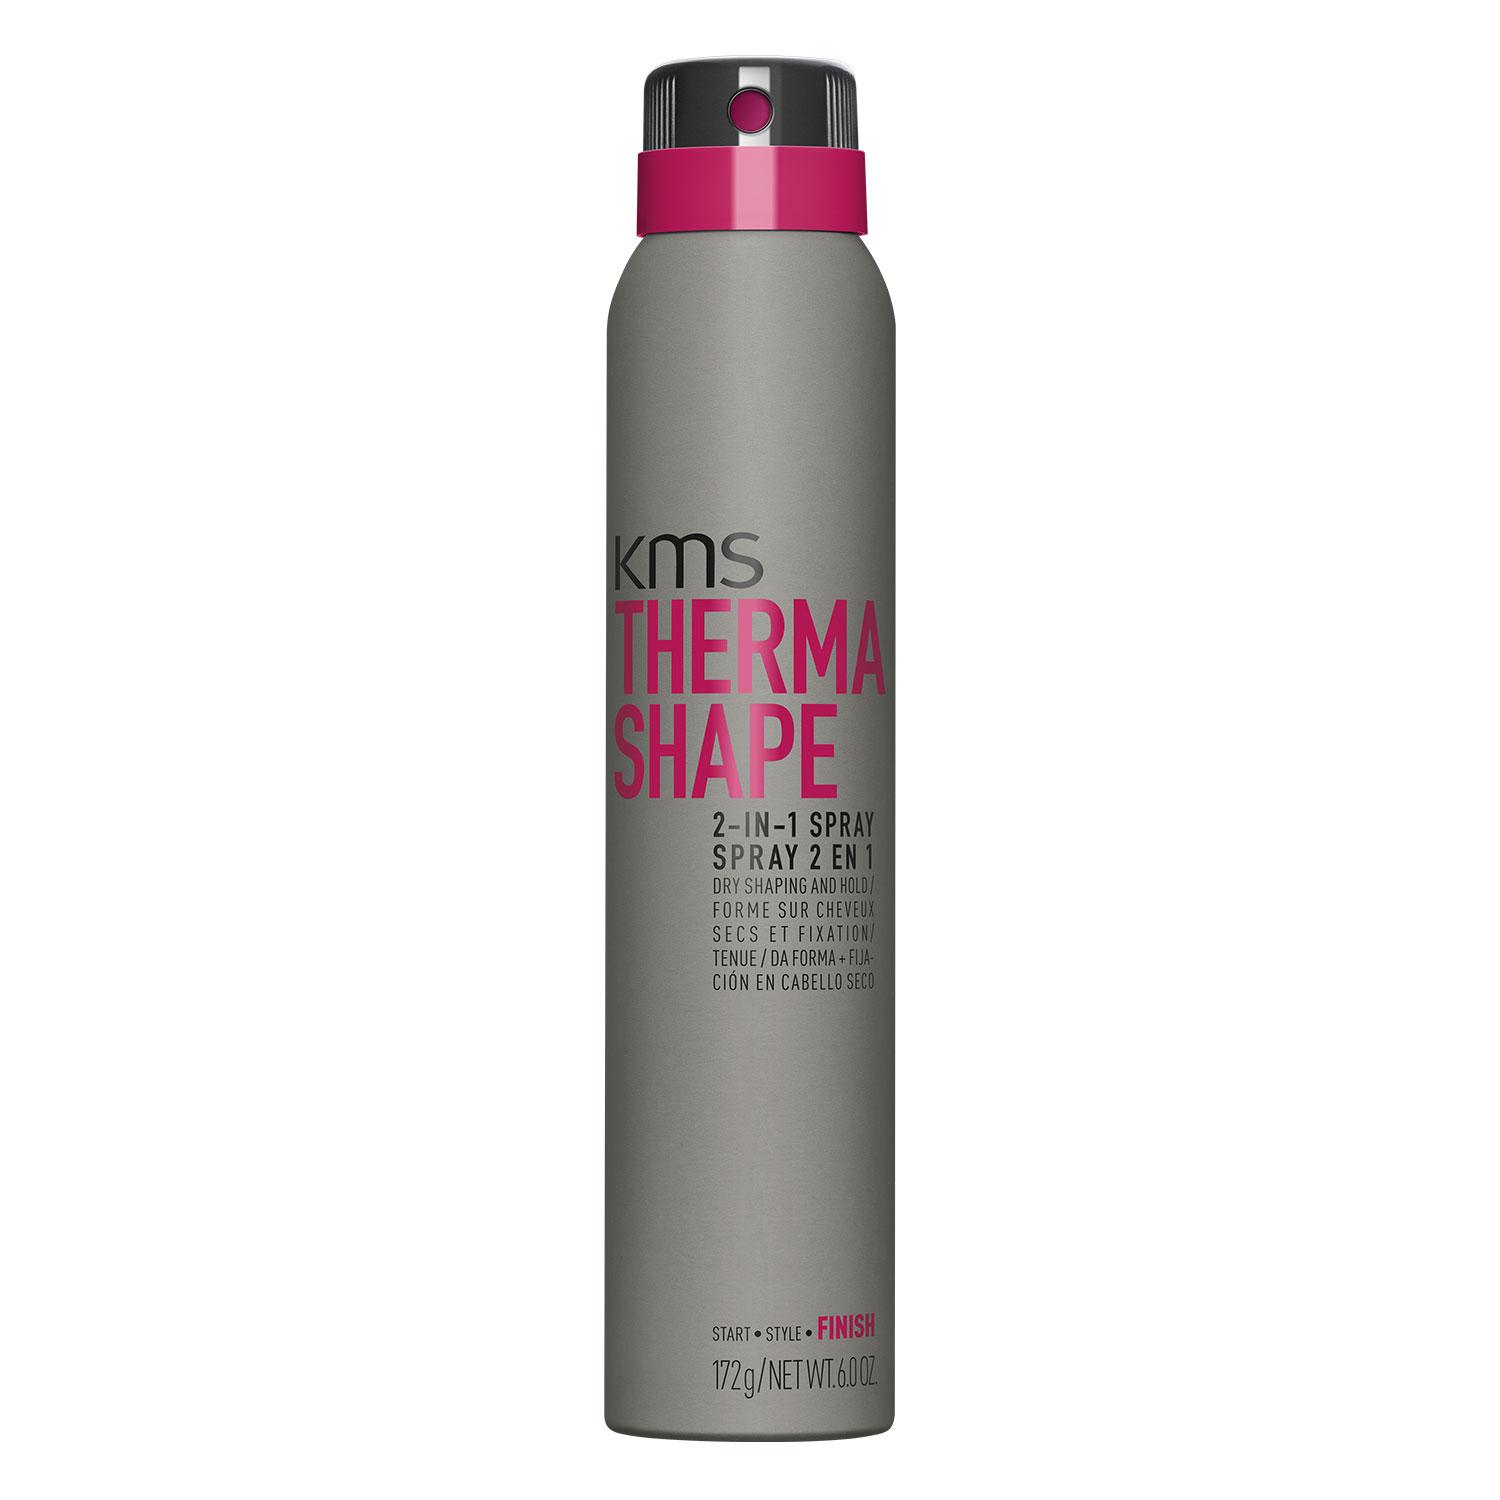 Thermashape - 2-in-1 Spray